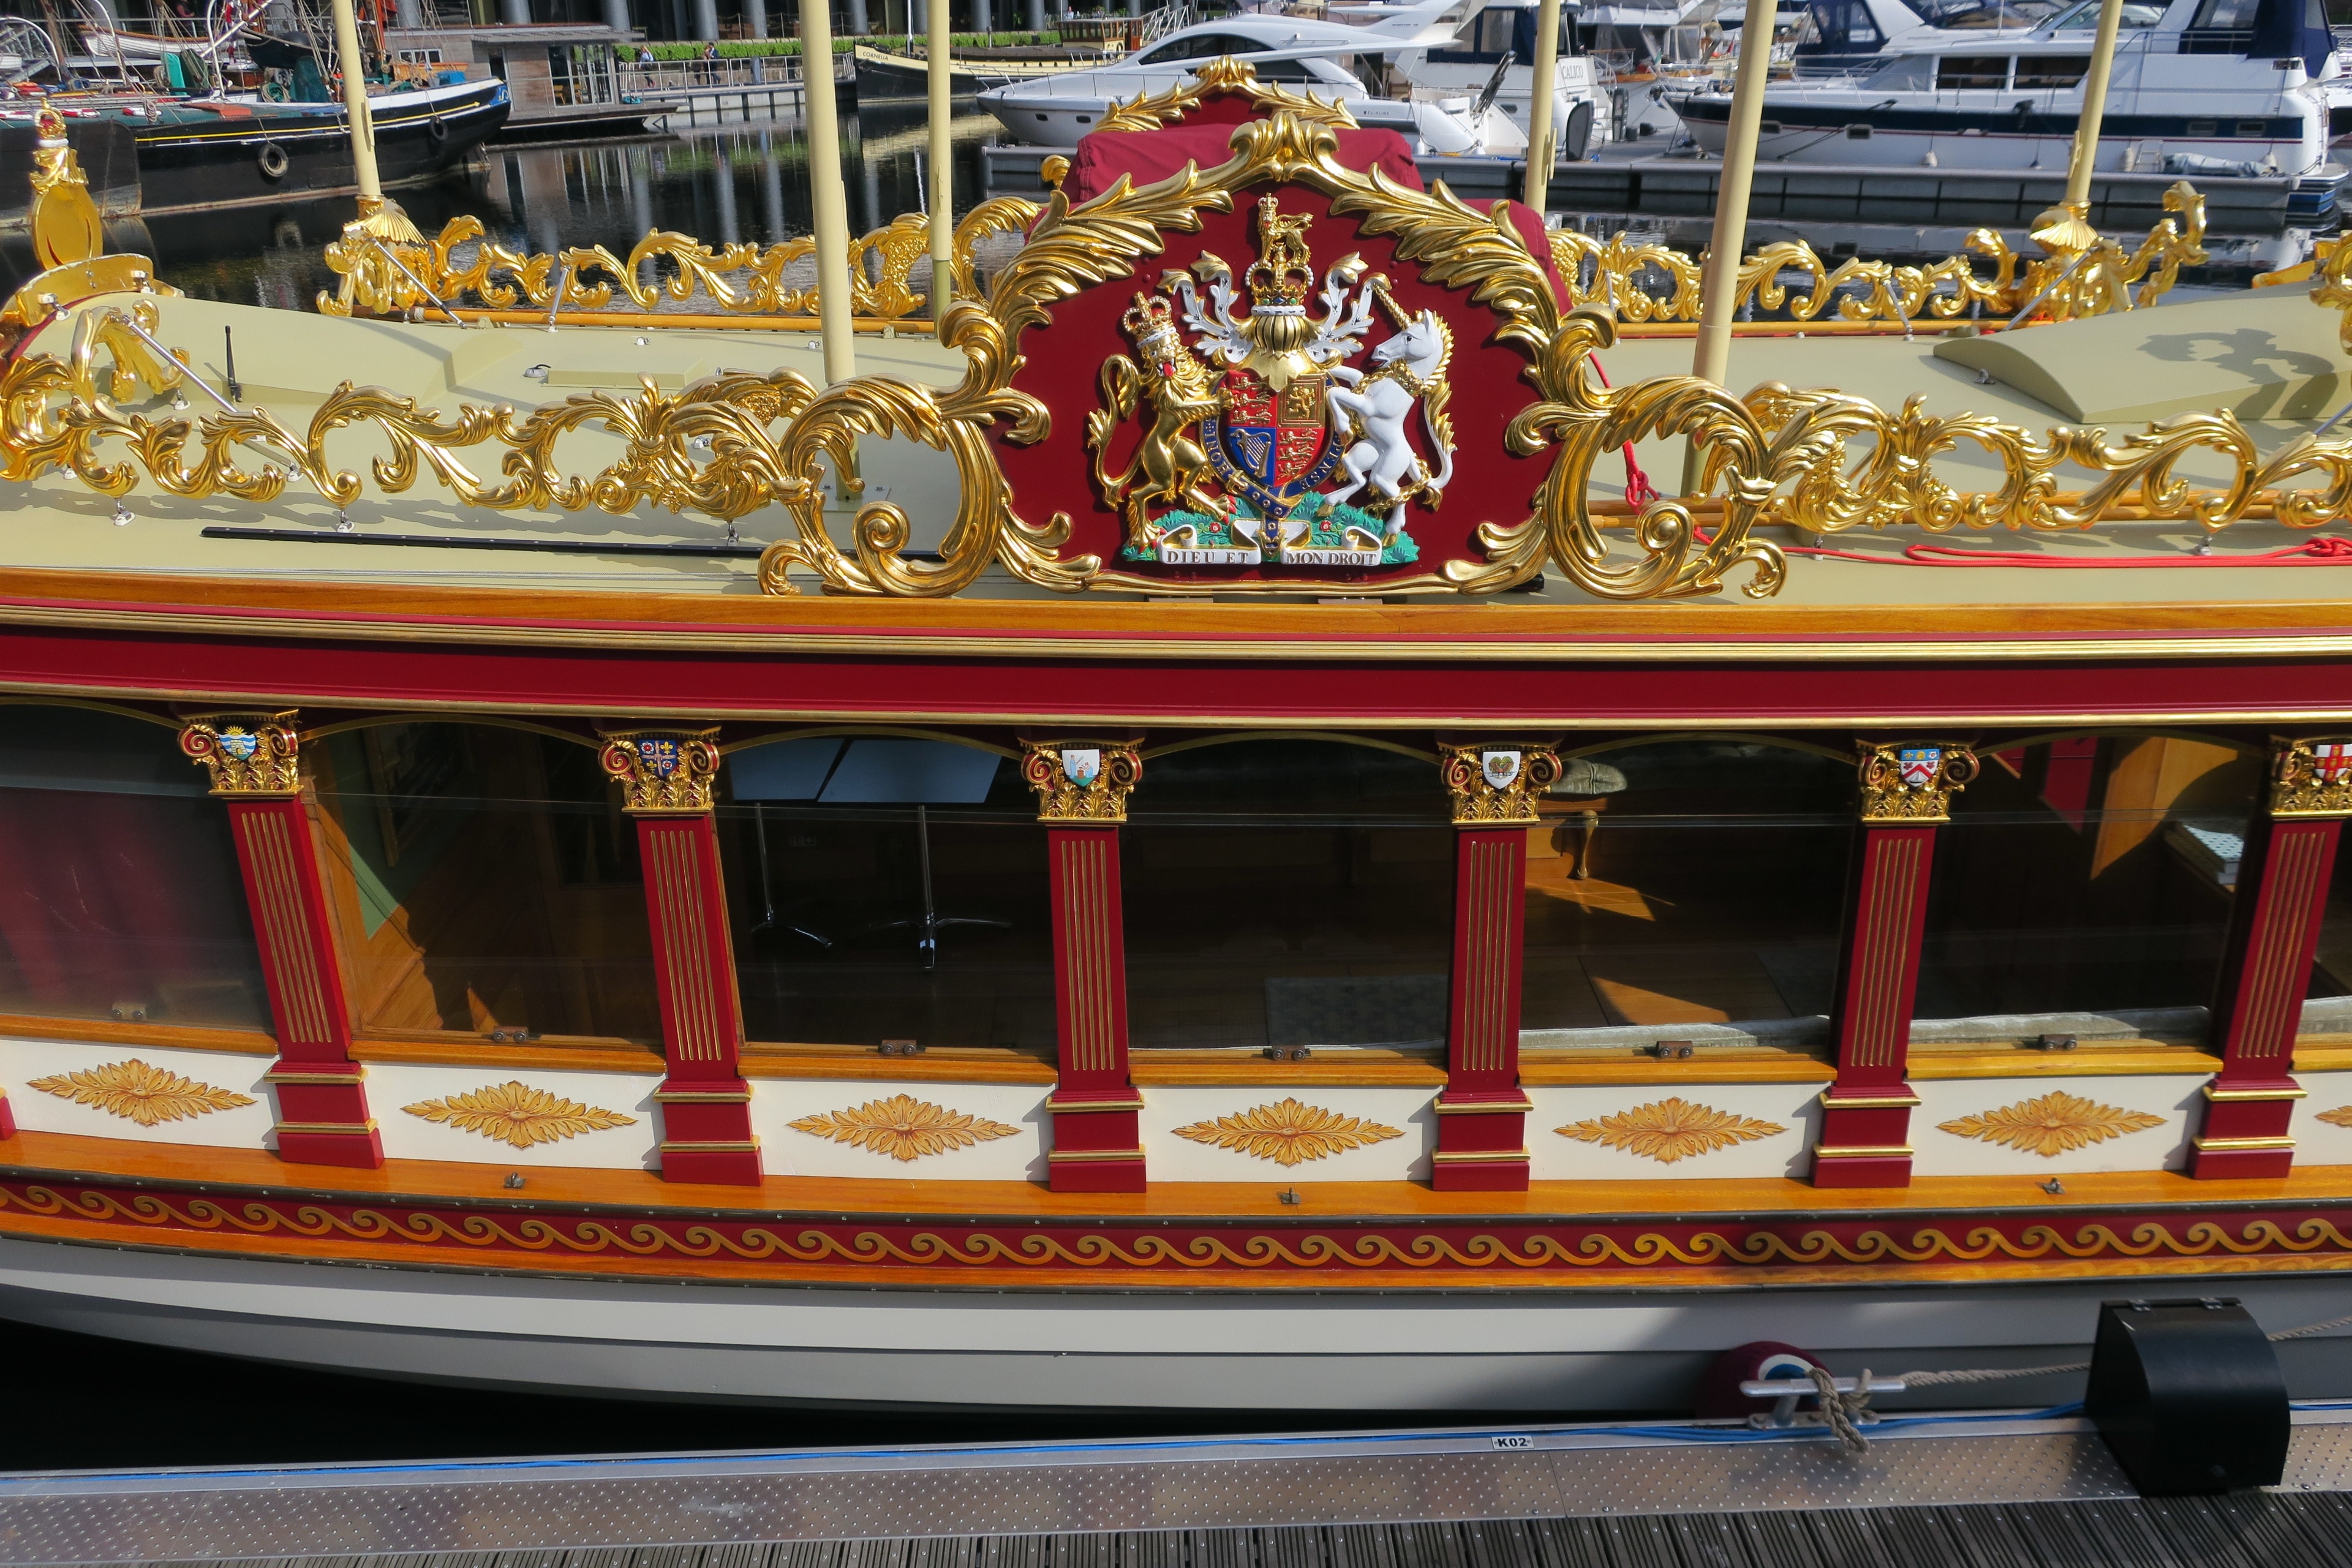 The royal crest on the Queen's Barge at ST Katherine's Dock